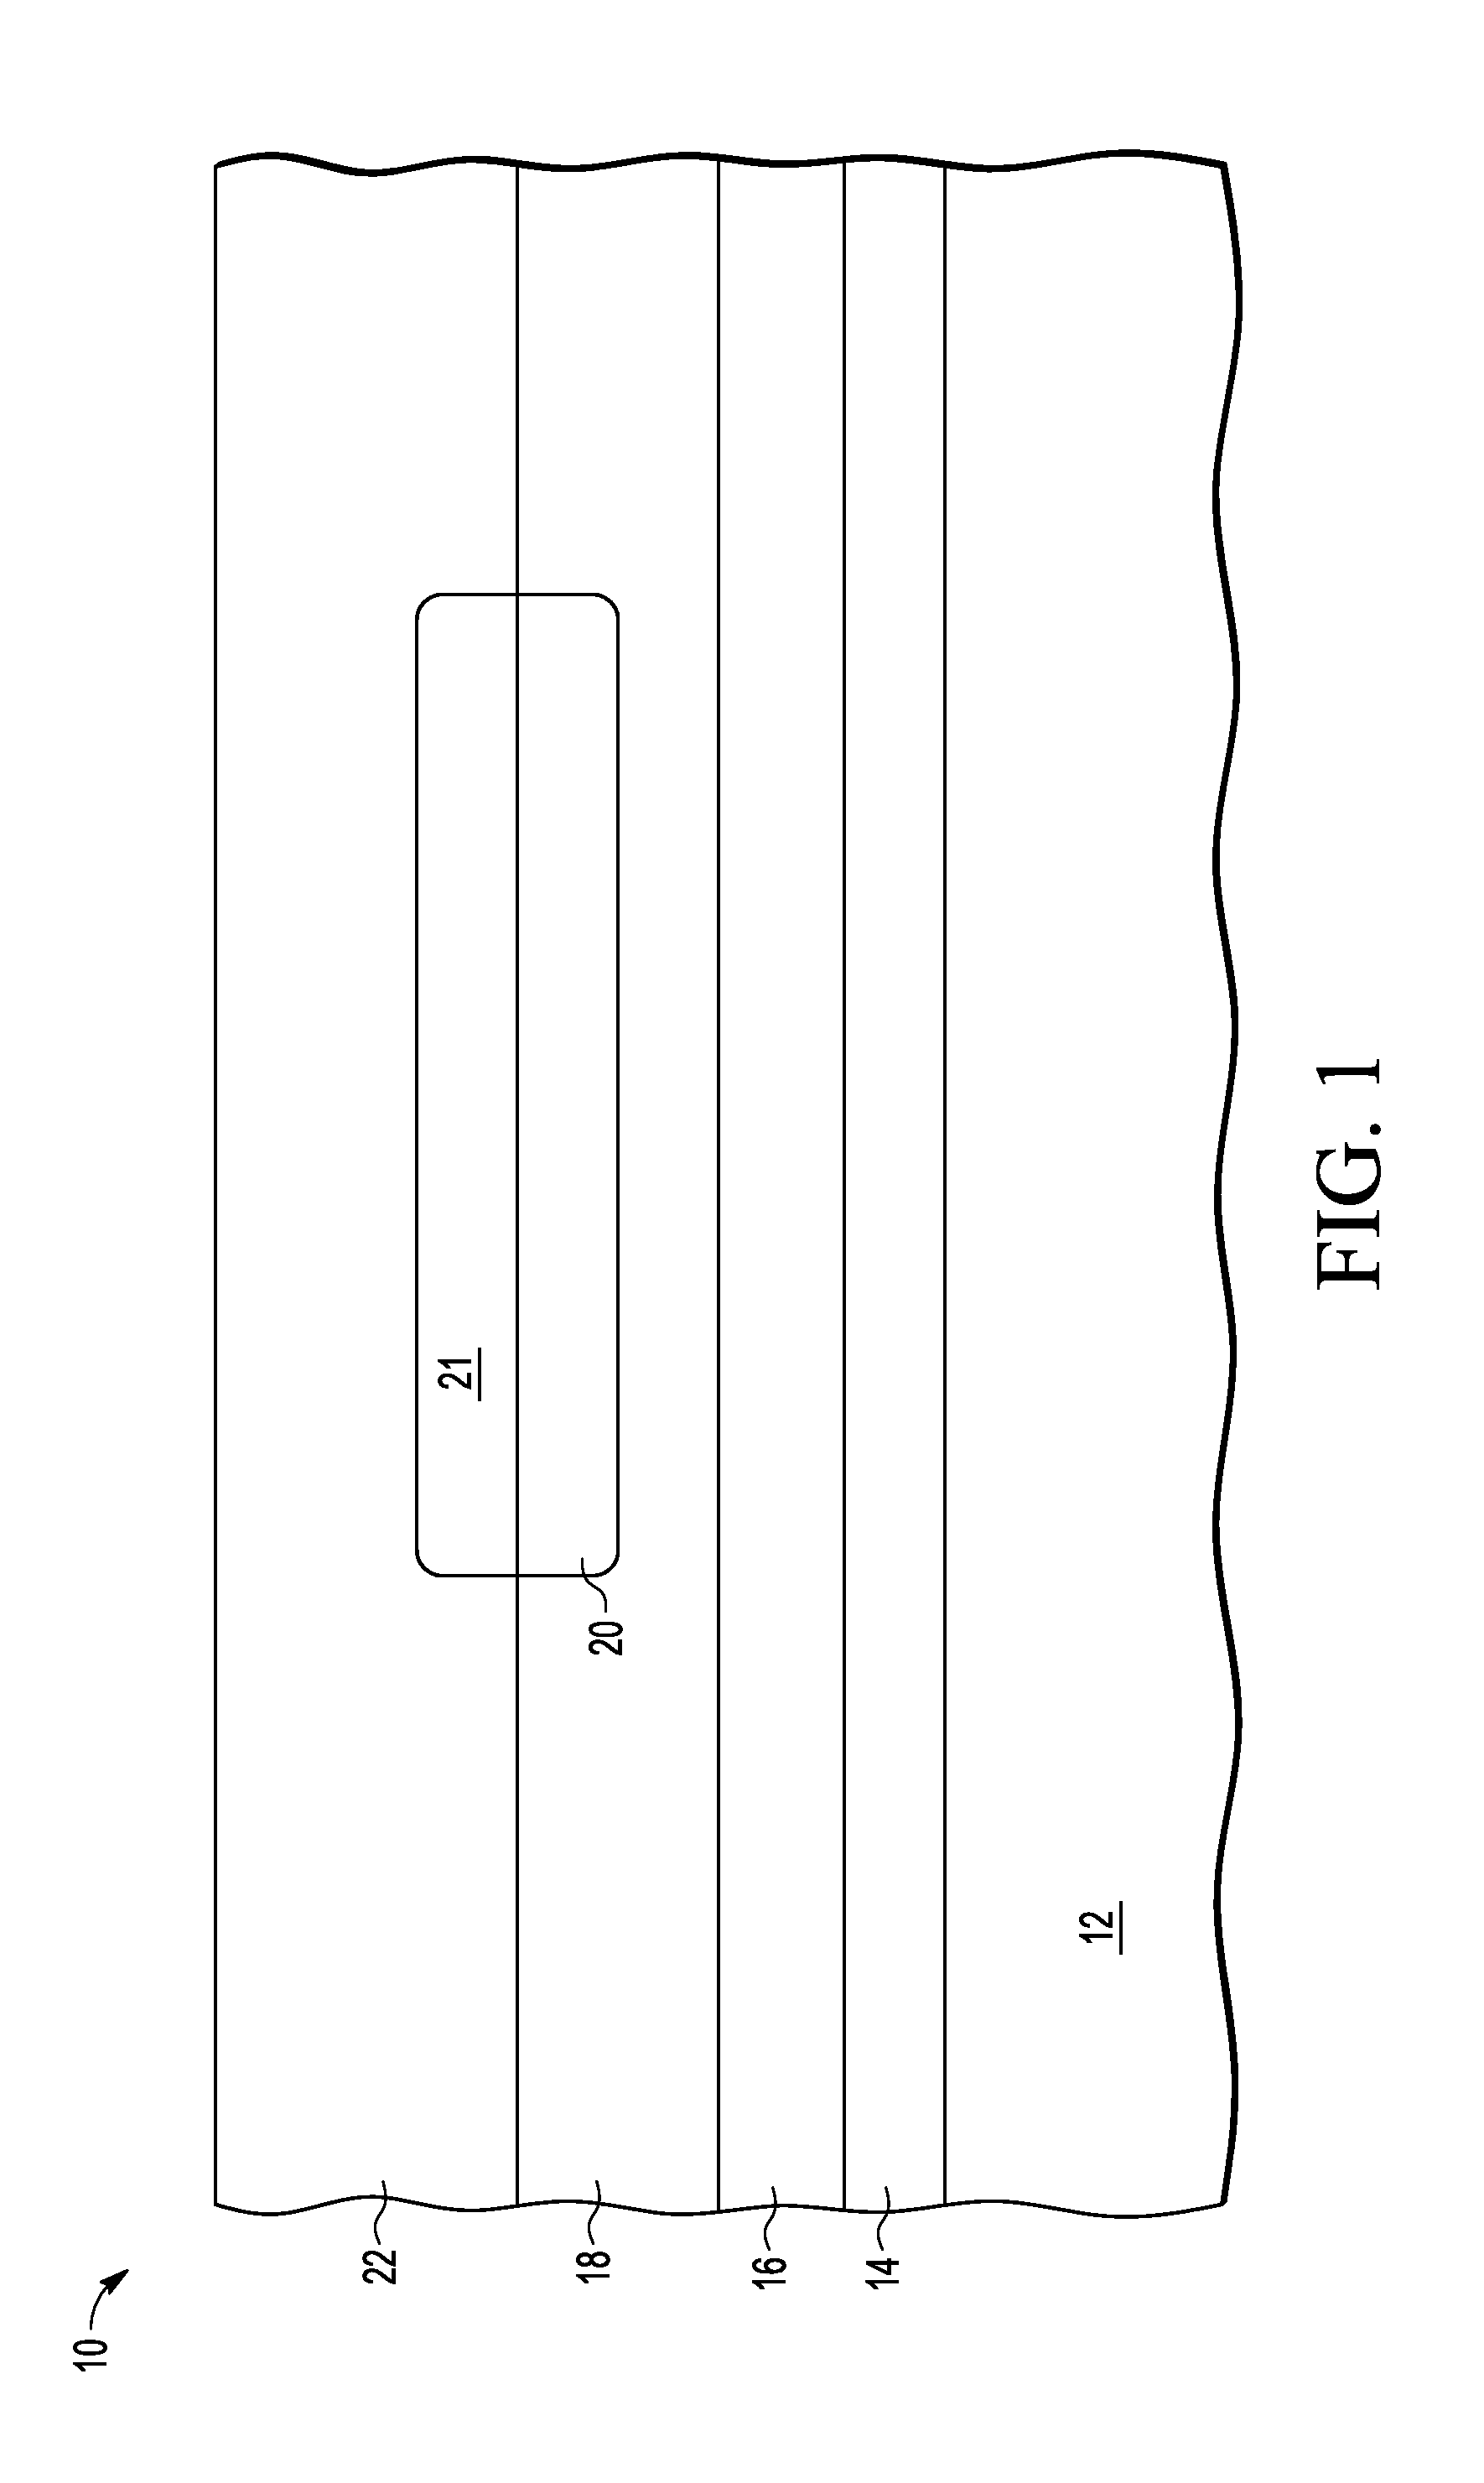 Laterally double diffused metal oxide semiconductor transistor having a reduced surface field structure and method therefor